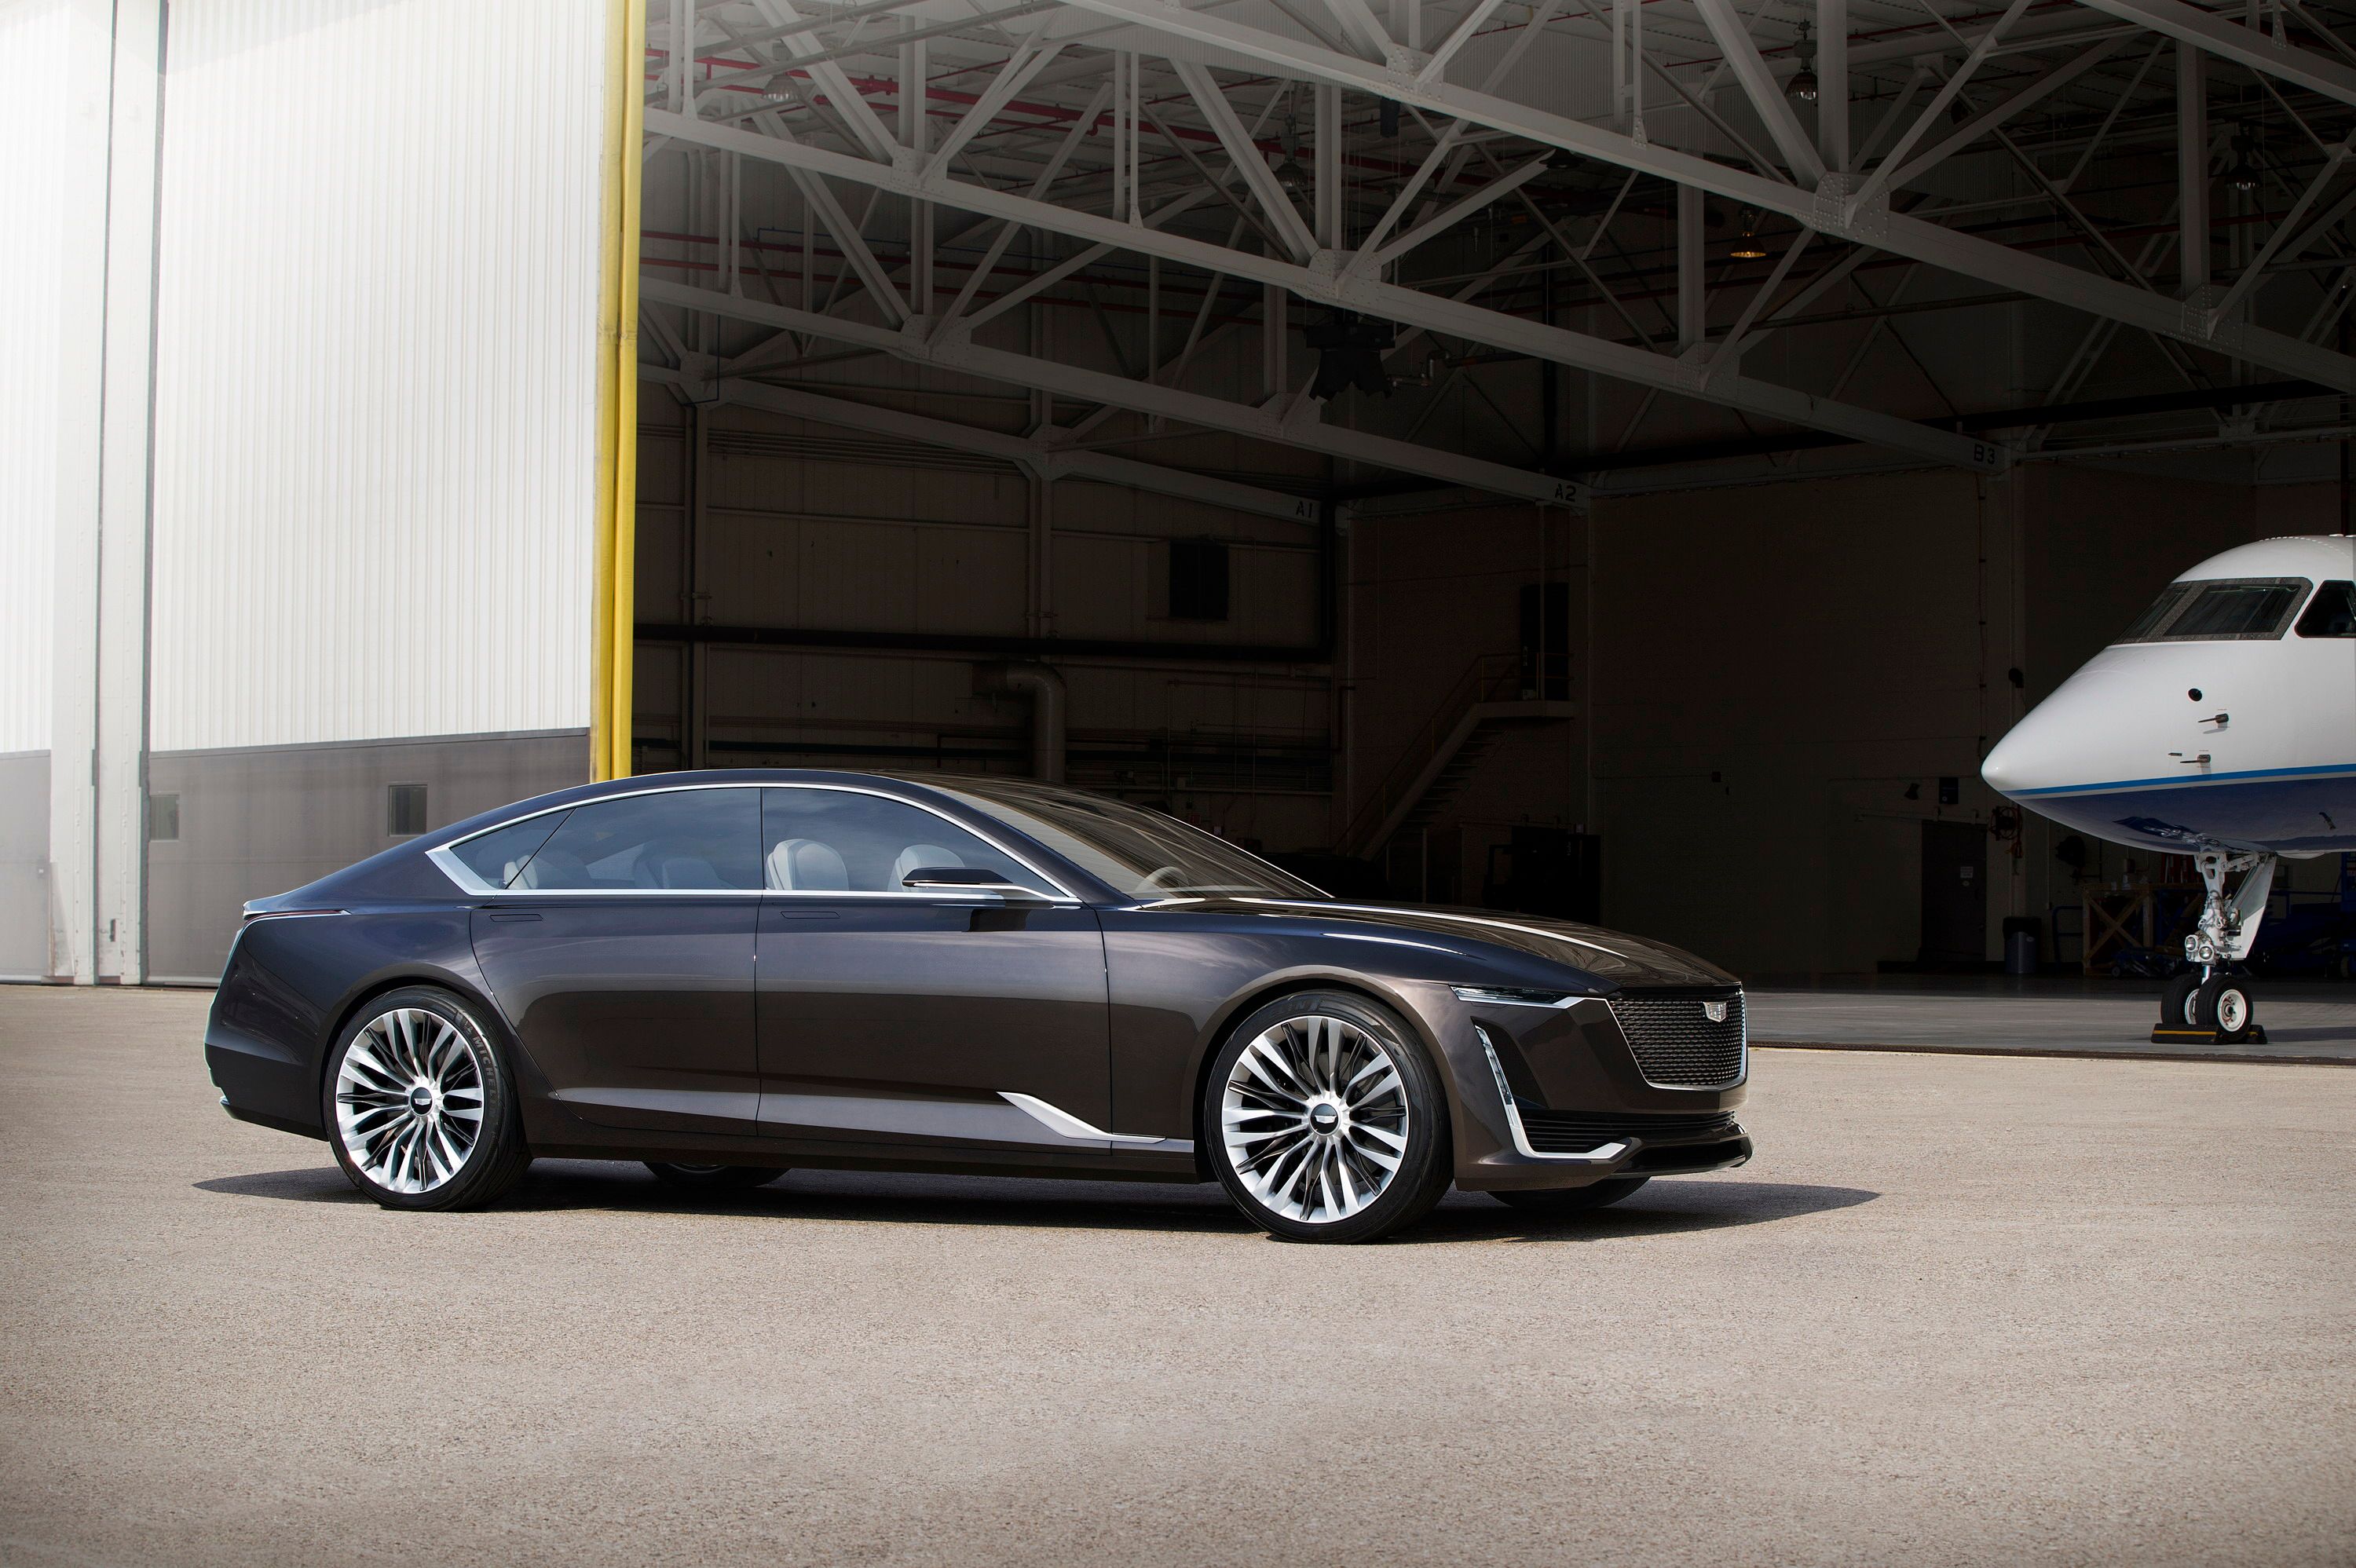 2020 The Six-Figure Cadillac Celestiq Sounds Like an Attempted Money Grab That Will Fail 